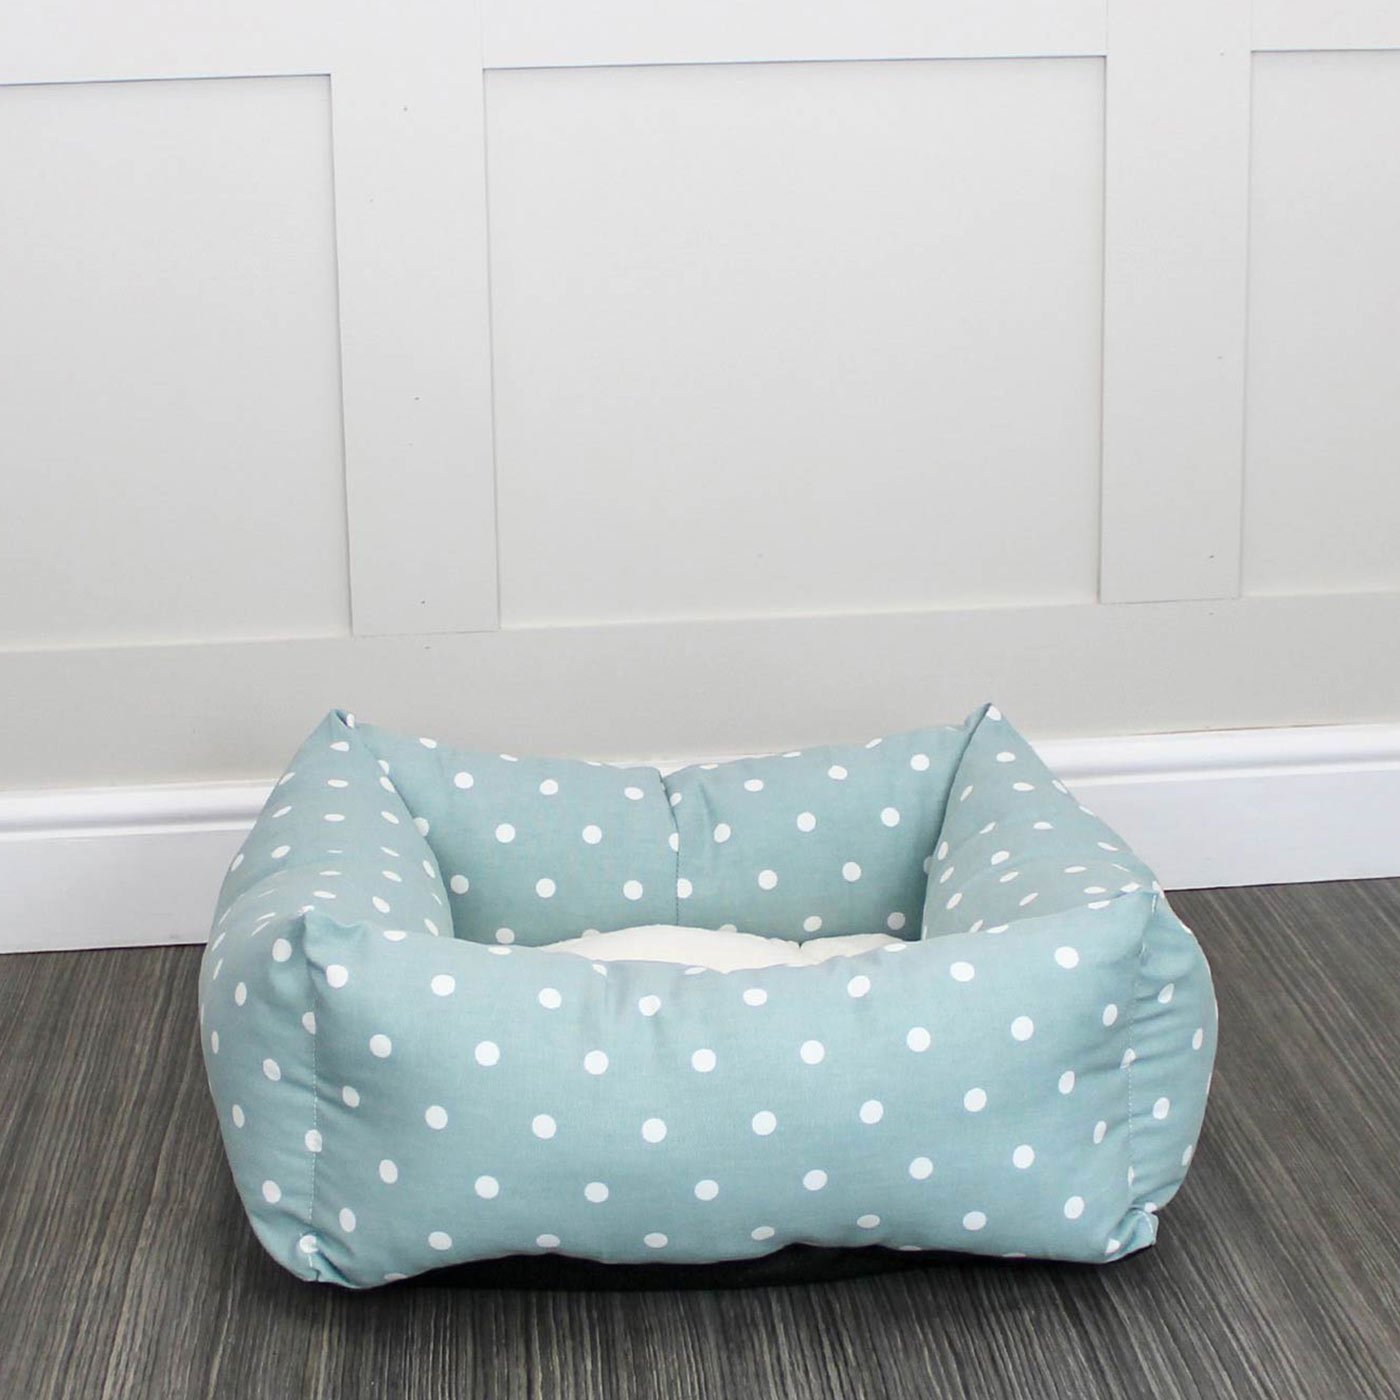 [color:duck egg spot] Luxury, Handmade Box Bed For Dogs, A Stunning Duck Egg Spot Dog Bed Perfect For Your Pets Nap Time! Available at Lords & Labradors US